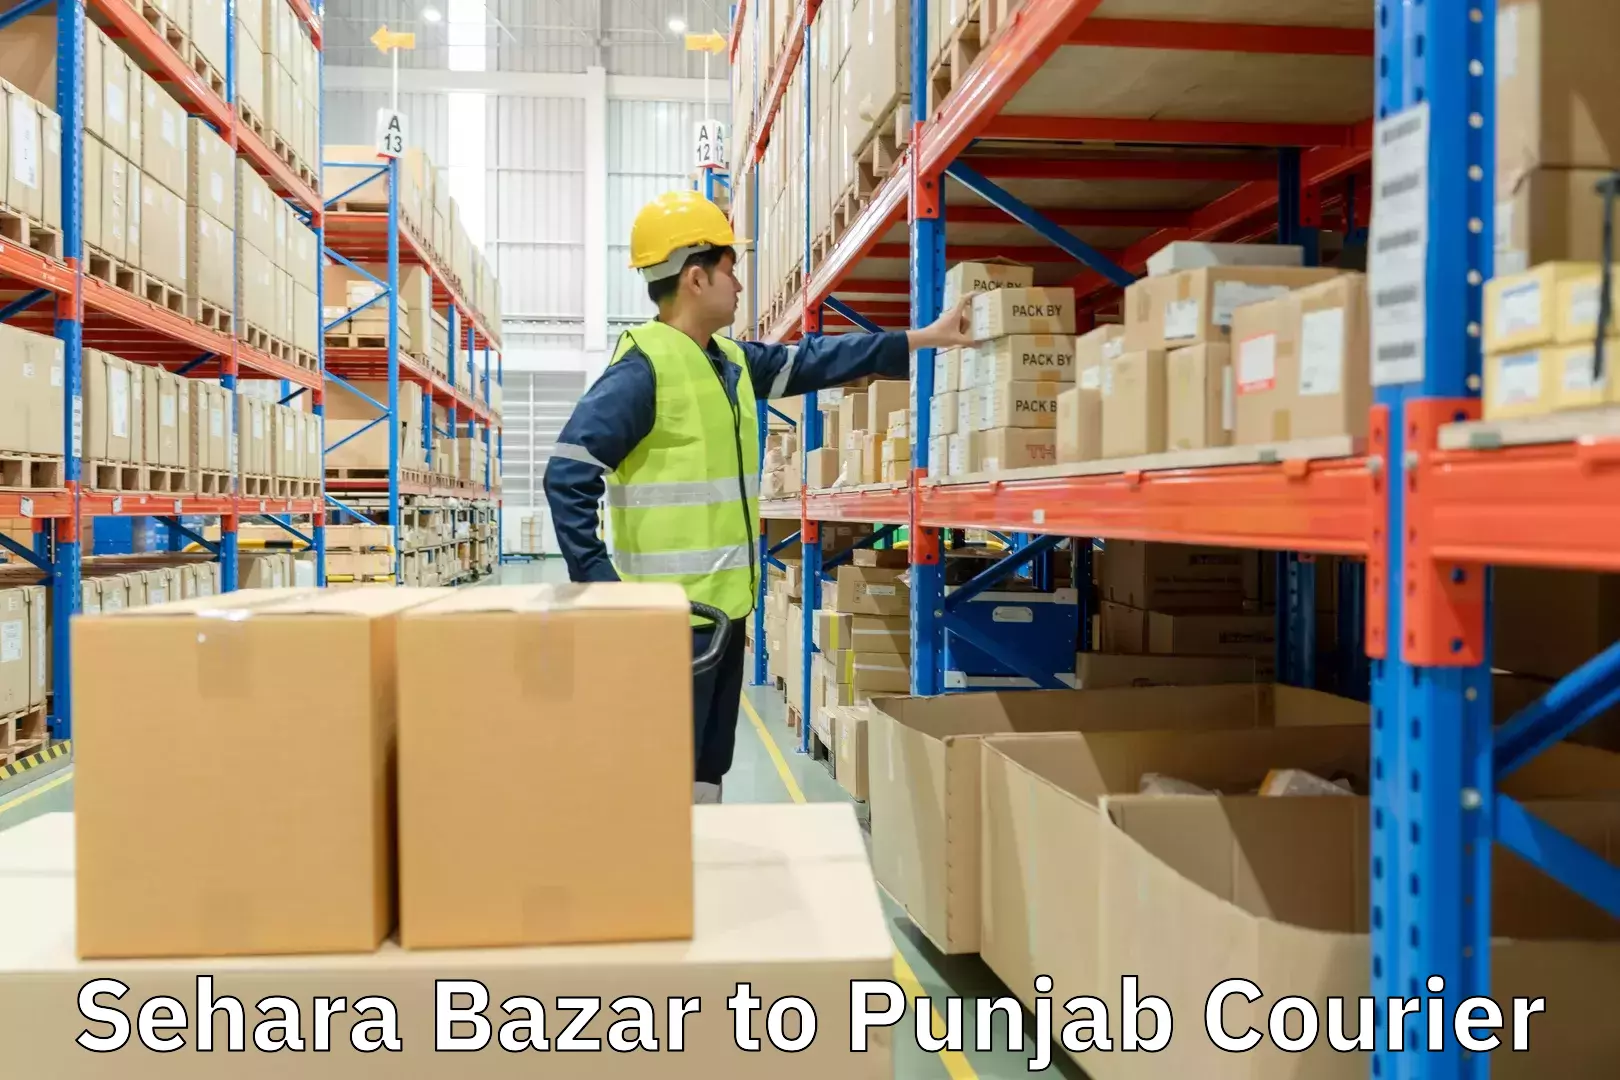 Express delivery capabilities Sehara Bazar to Punjab